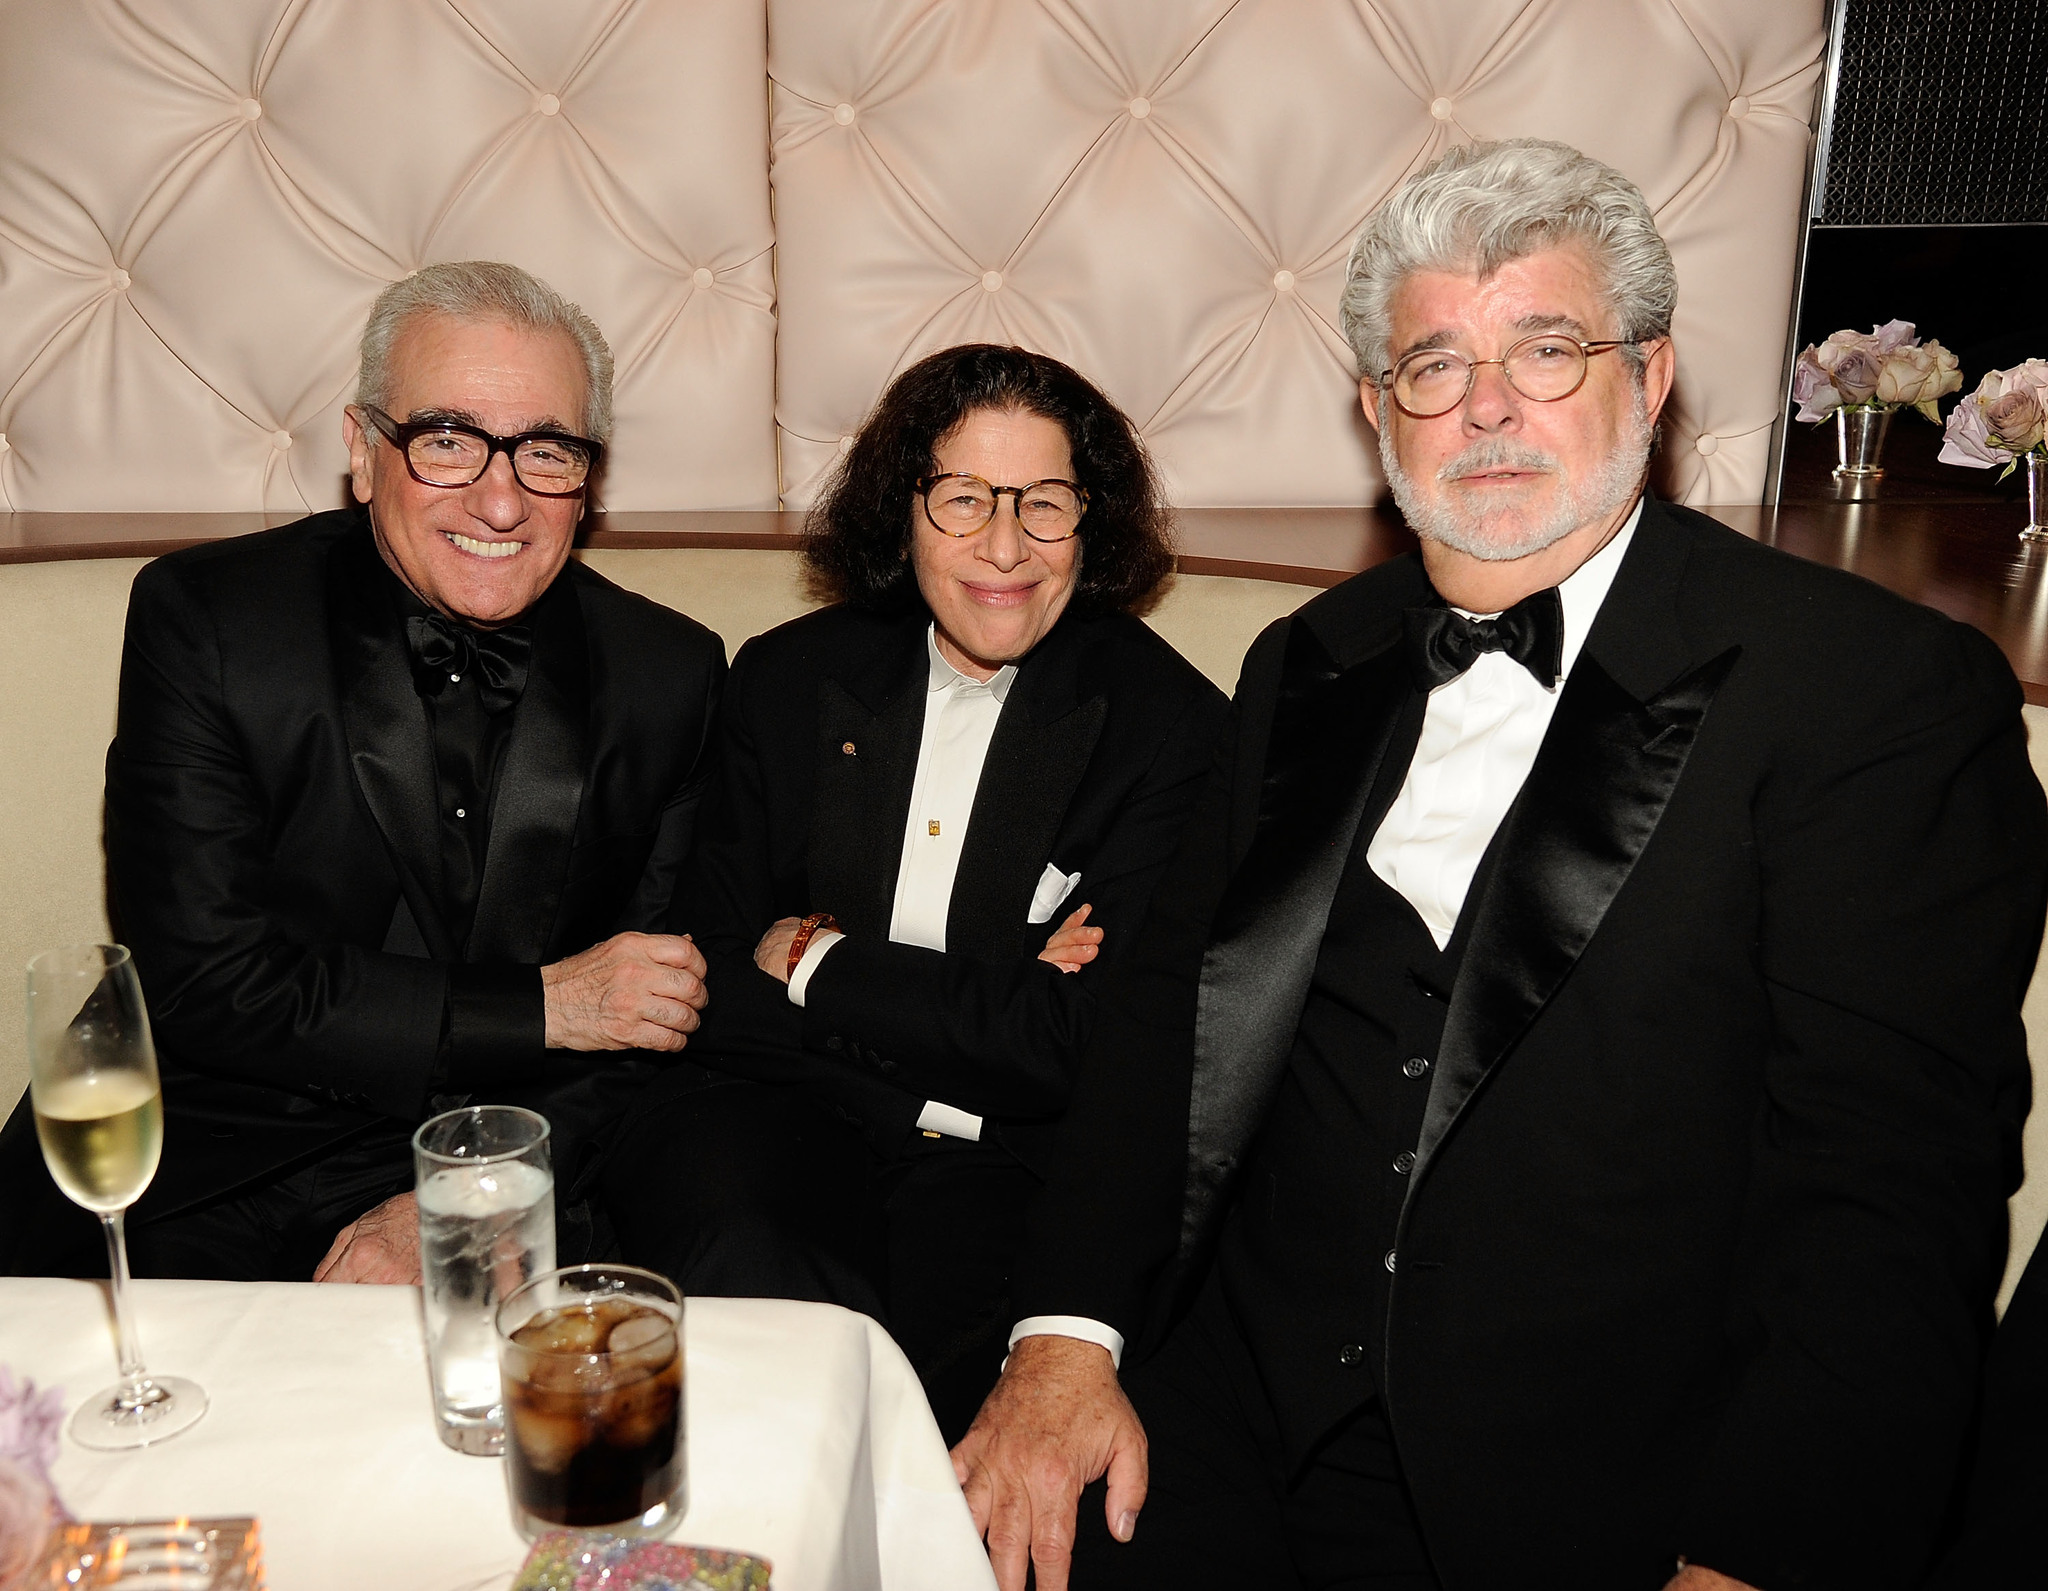 George Lucas, Martin Scorsese and Fran Lebowitz